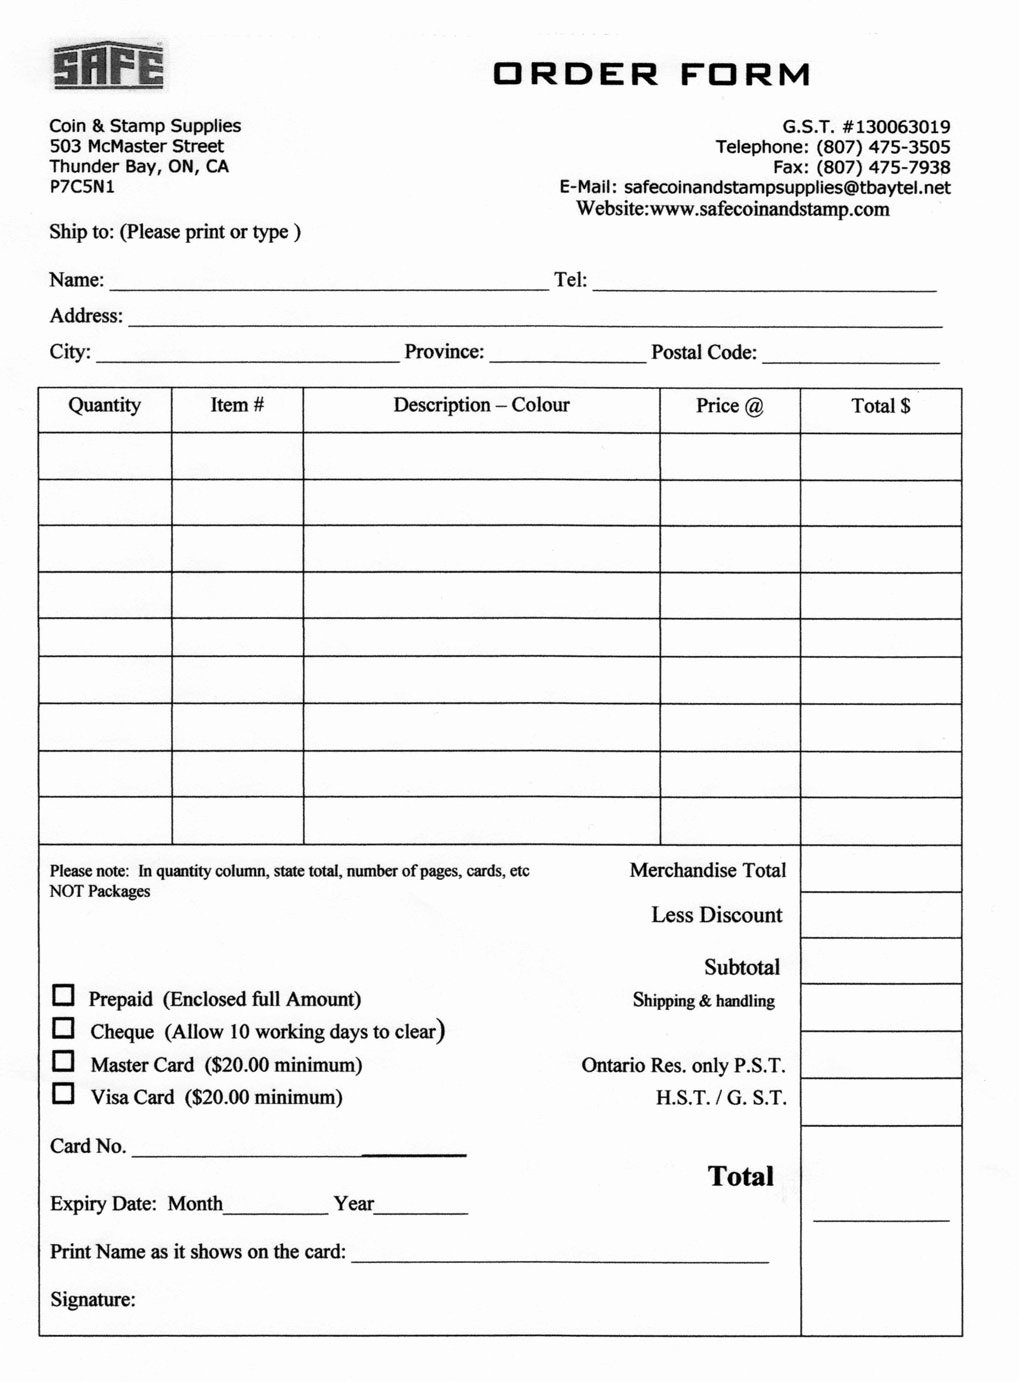 Template for order form New Safe Coin and Stamp order form